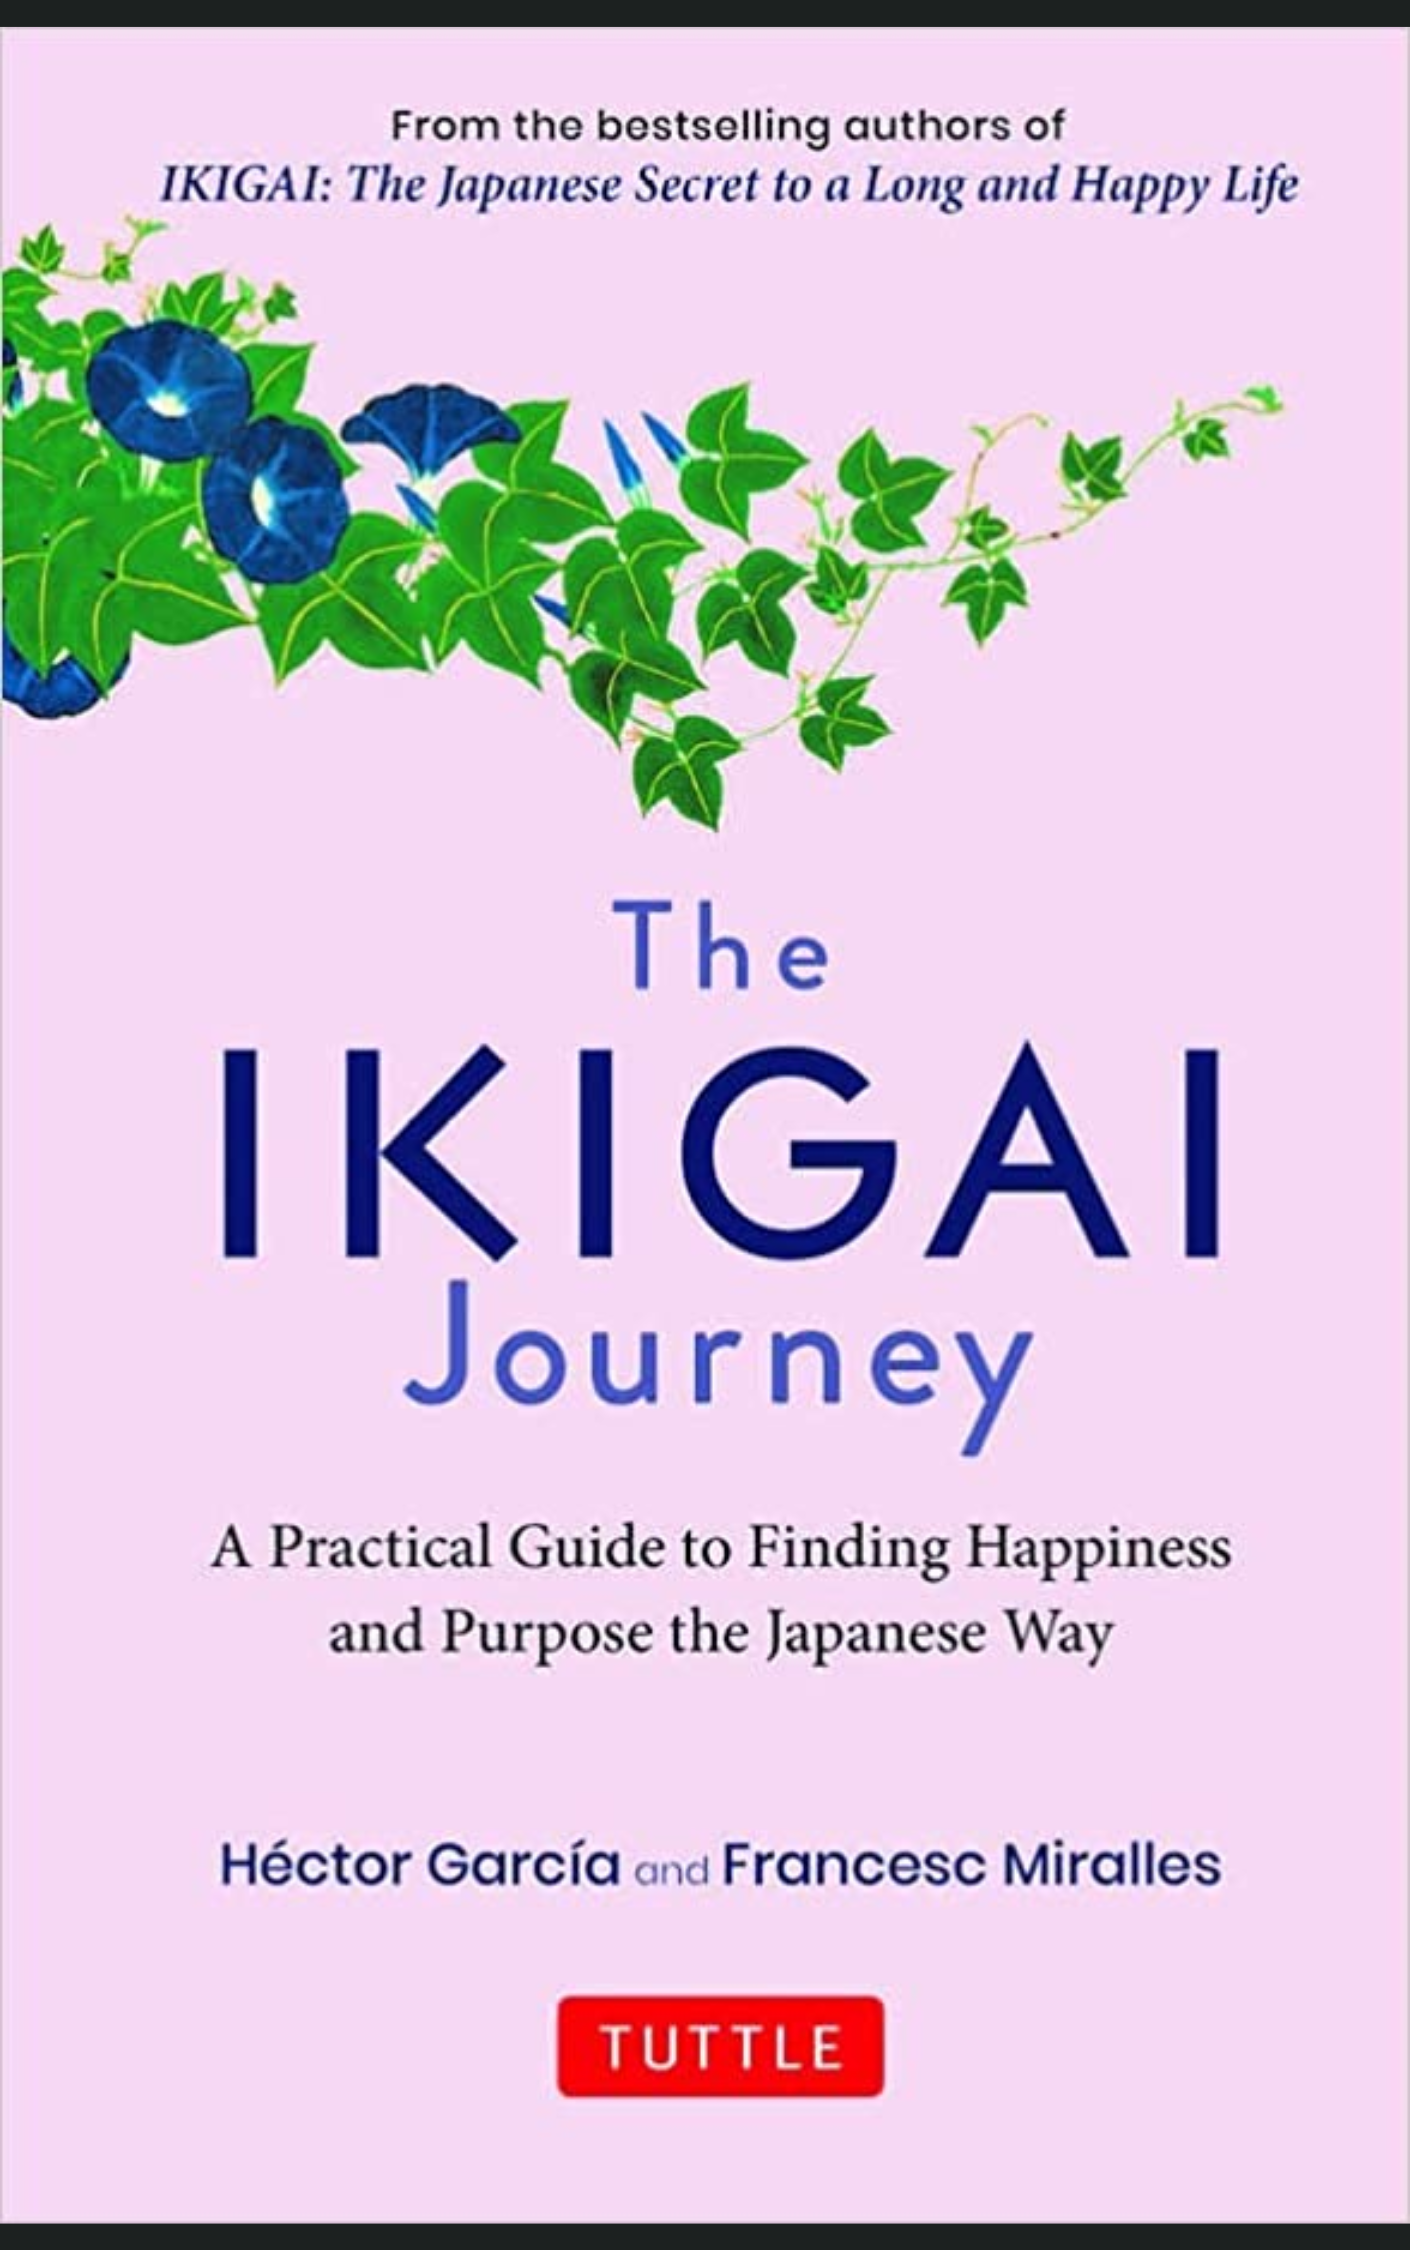 THE IKIGAI JOURNEY [PAPERBACK] by HECTOR GARCIA